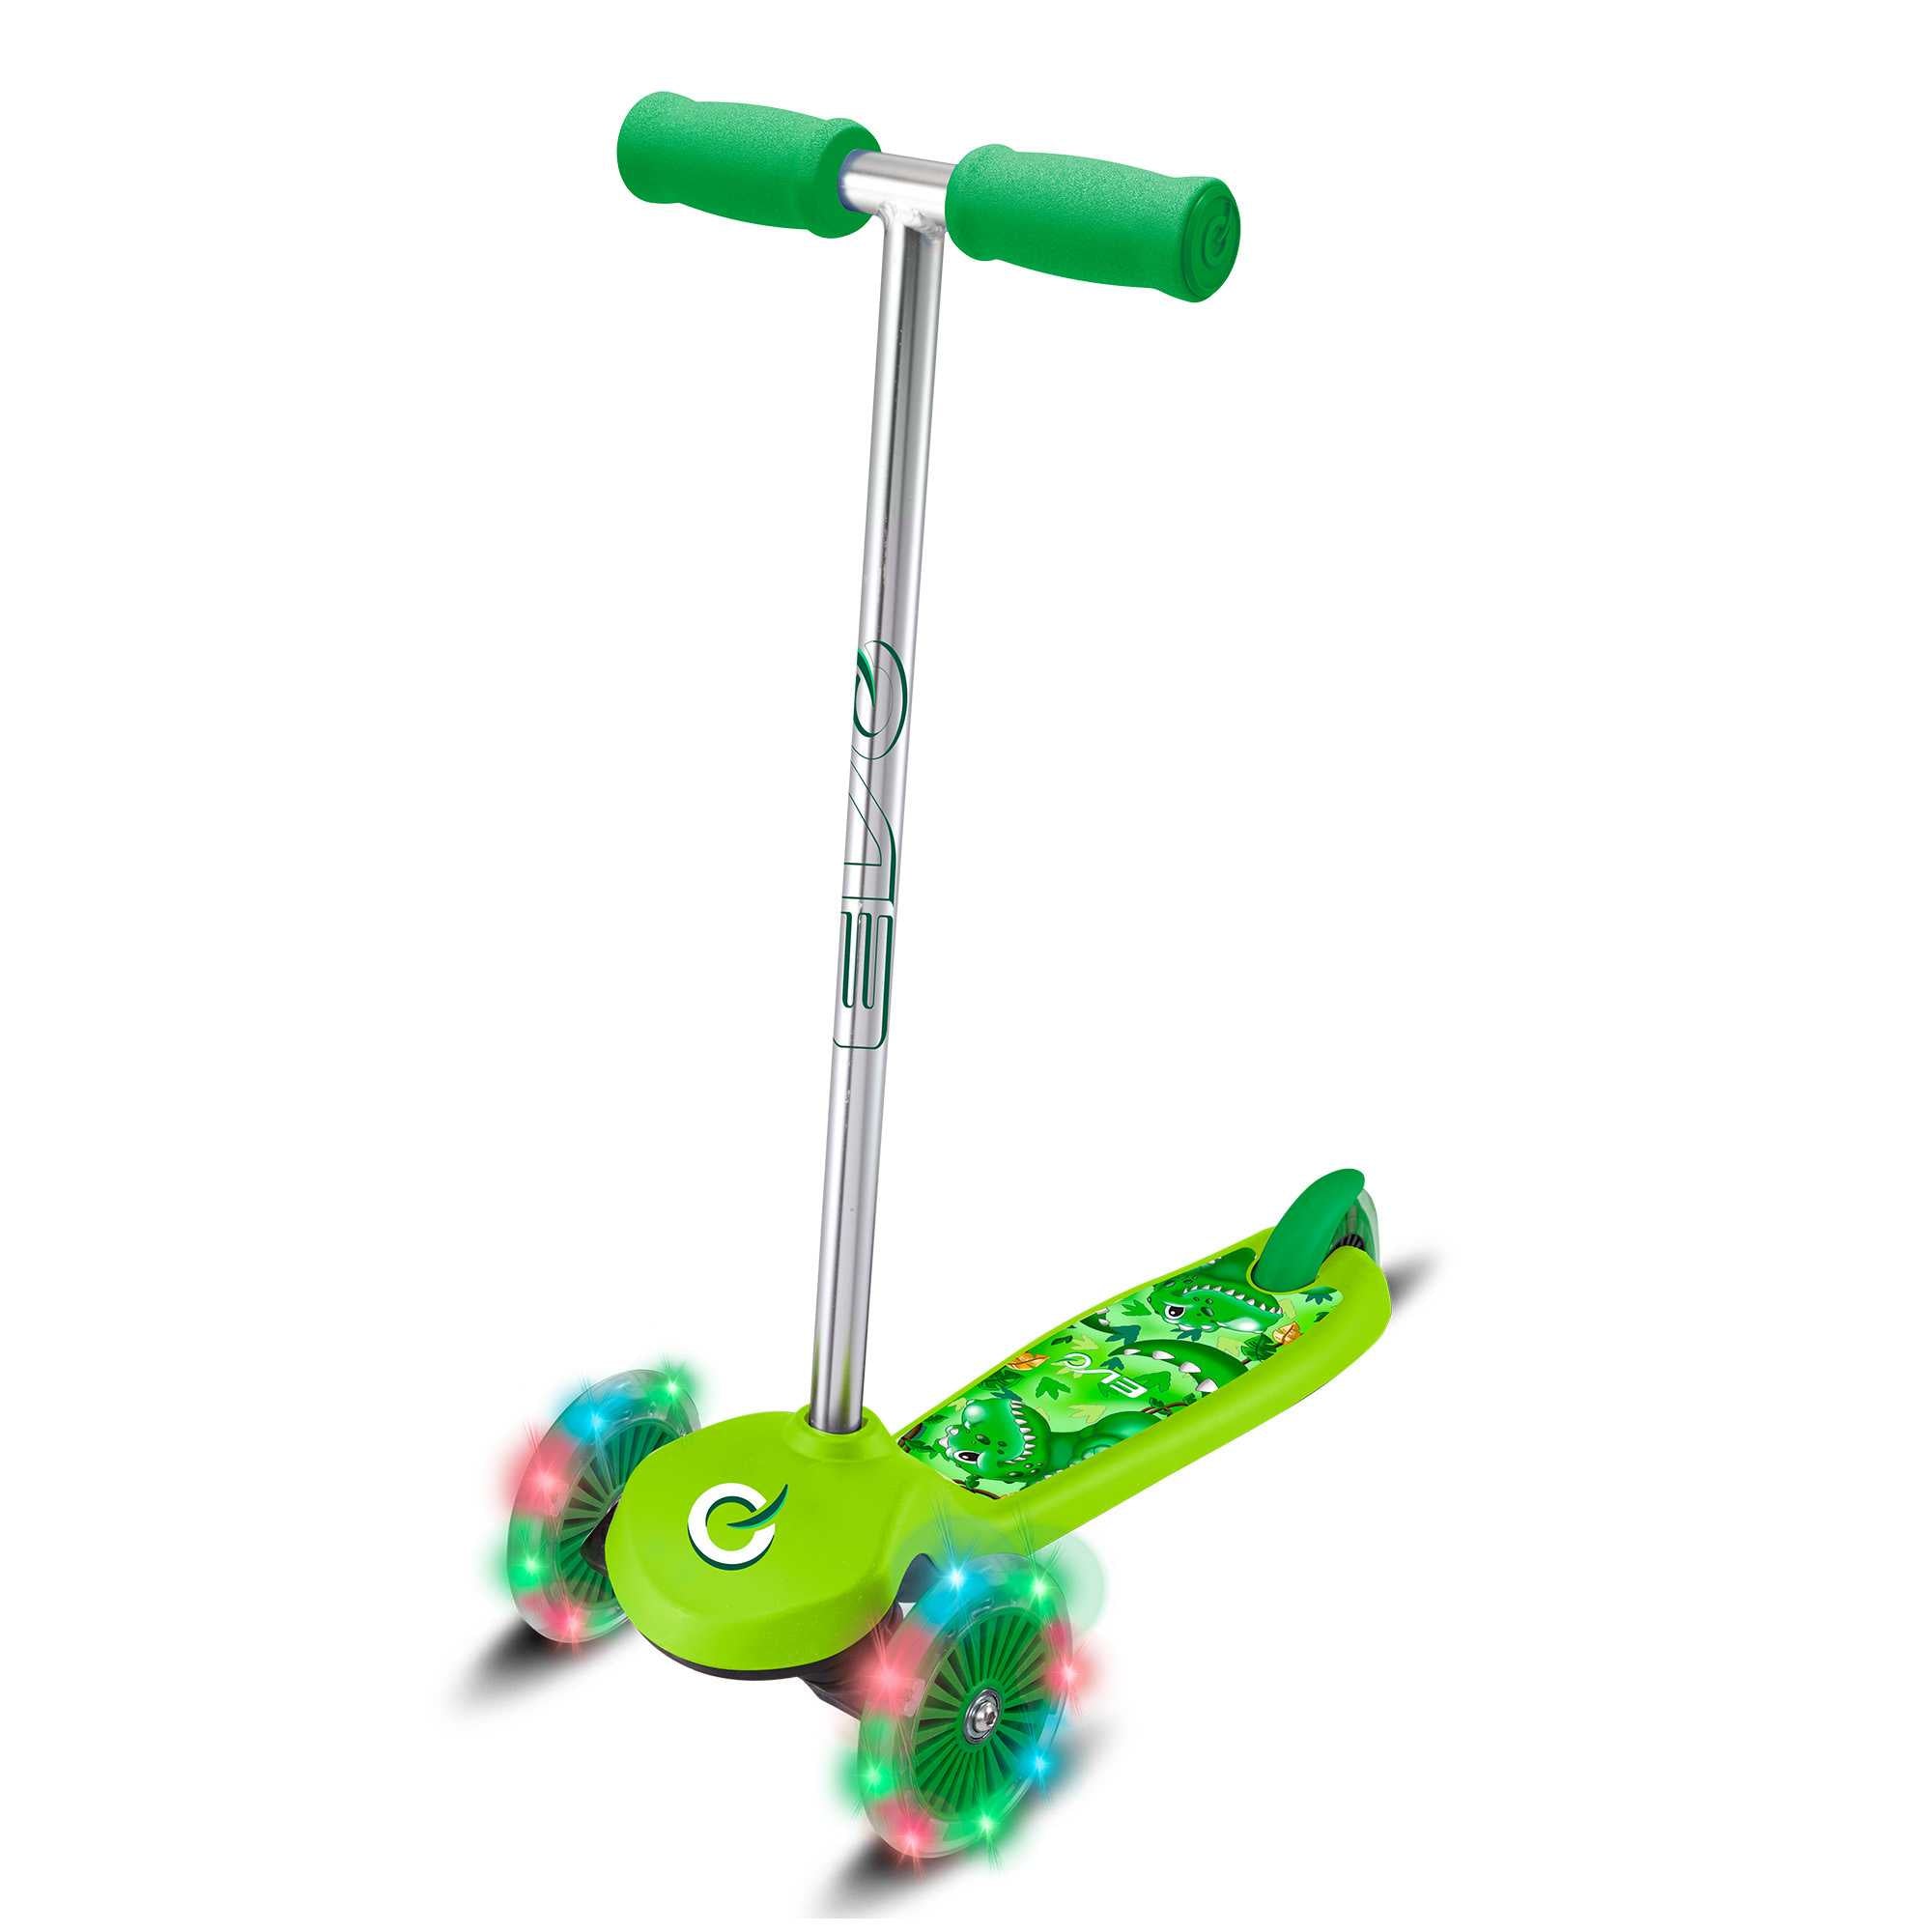 EVO Light-Up Move 'N' Groove Childrens Scooter - Dinosaur